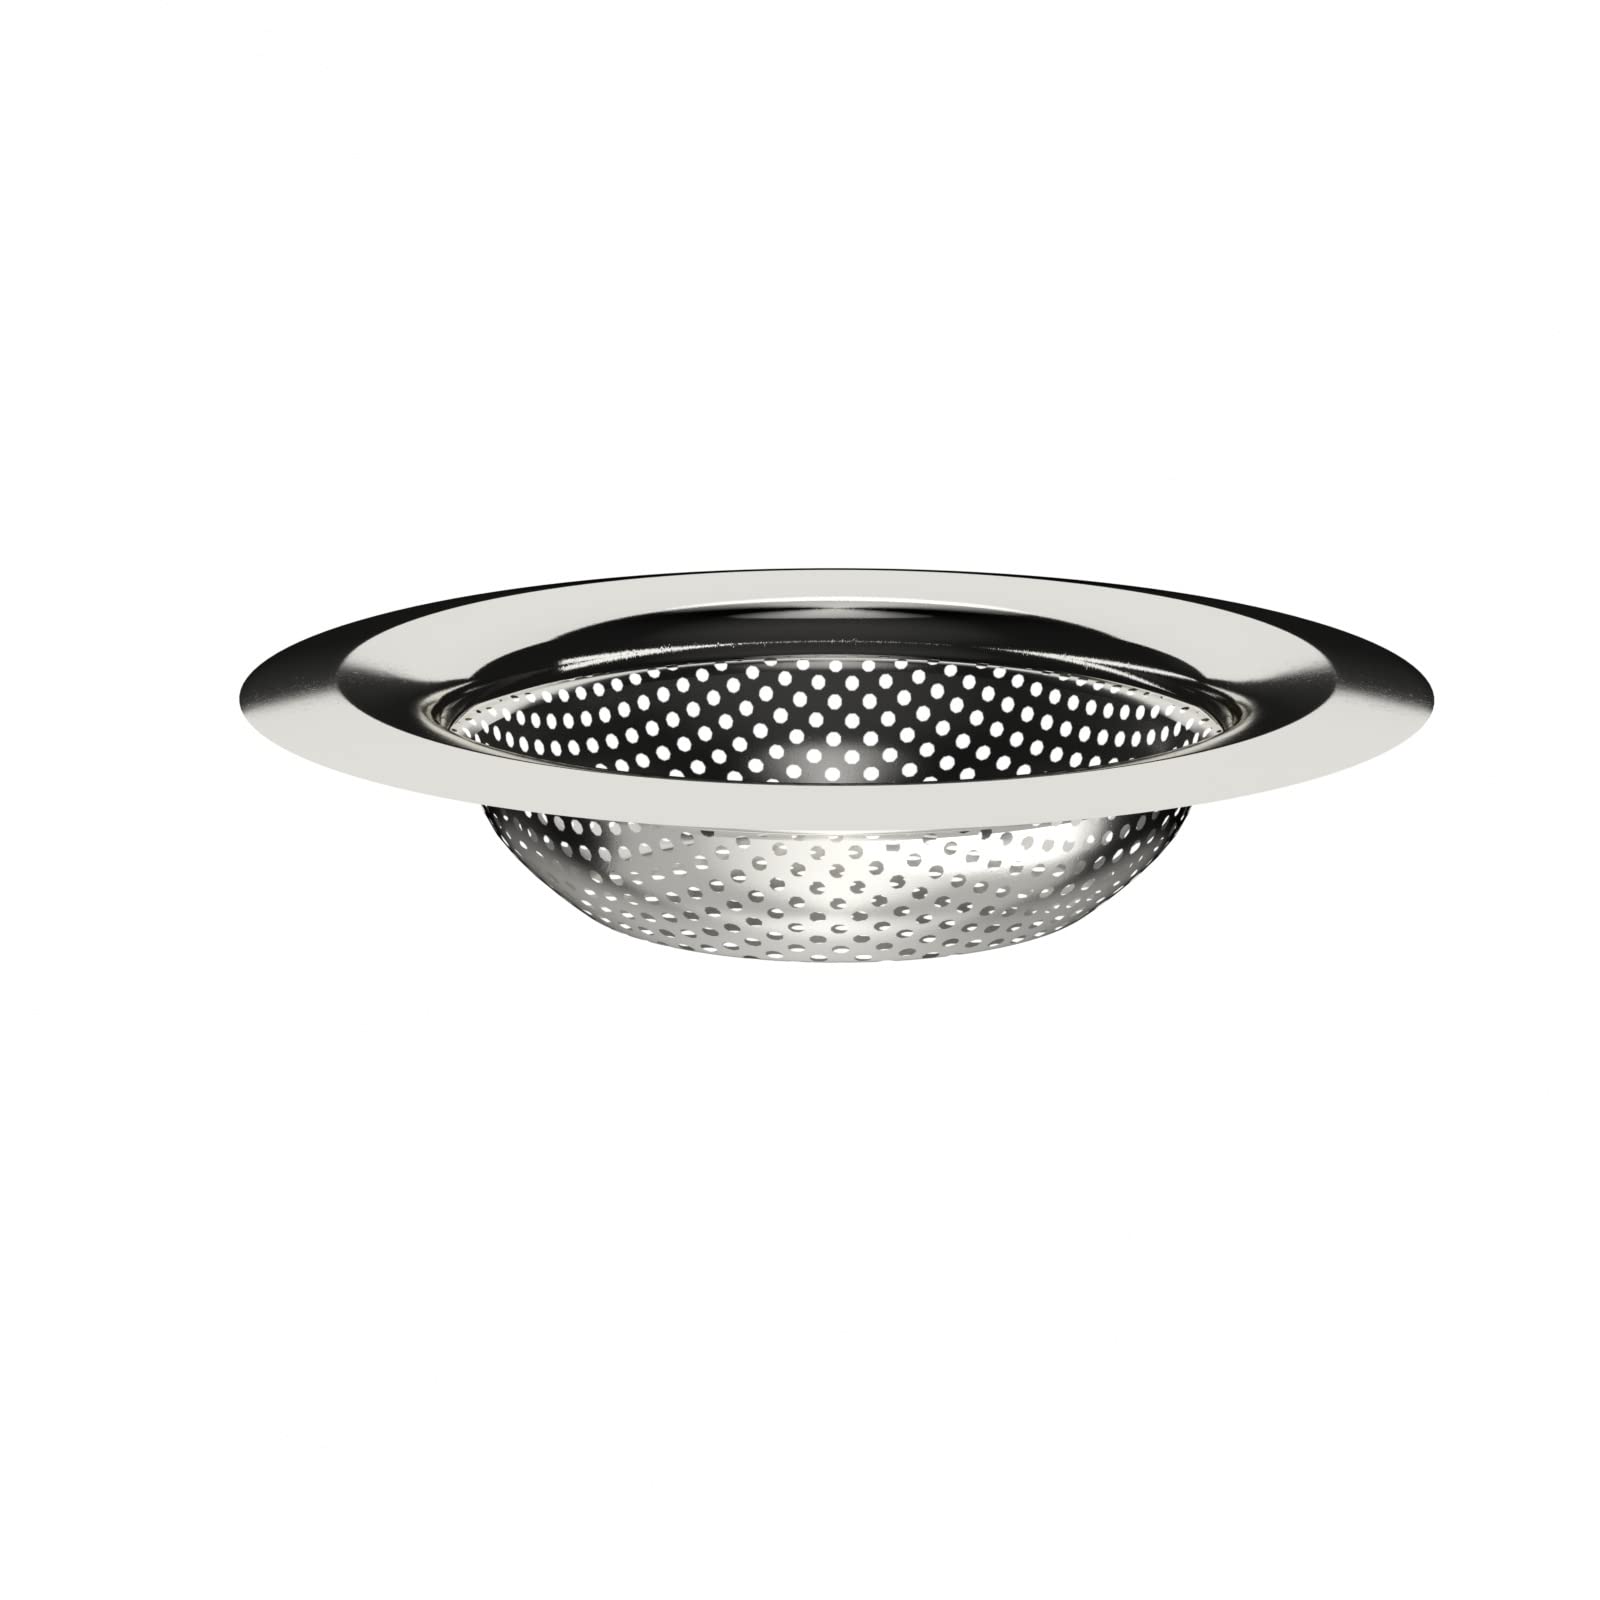 SlimmKISS Kitchen Sink Grid Stainless Steel Sink Protectors, Sink Bottom Grid Sink Racks for for Single or Double Bowl Sink, Corner Radius Sink Grate Rear Drain Hole with Sink Strainer,2pack